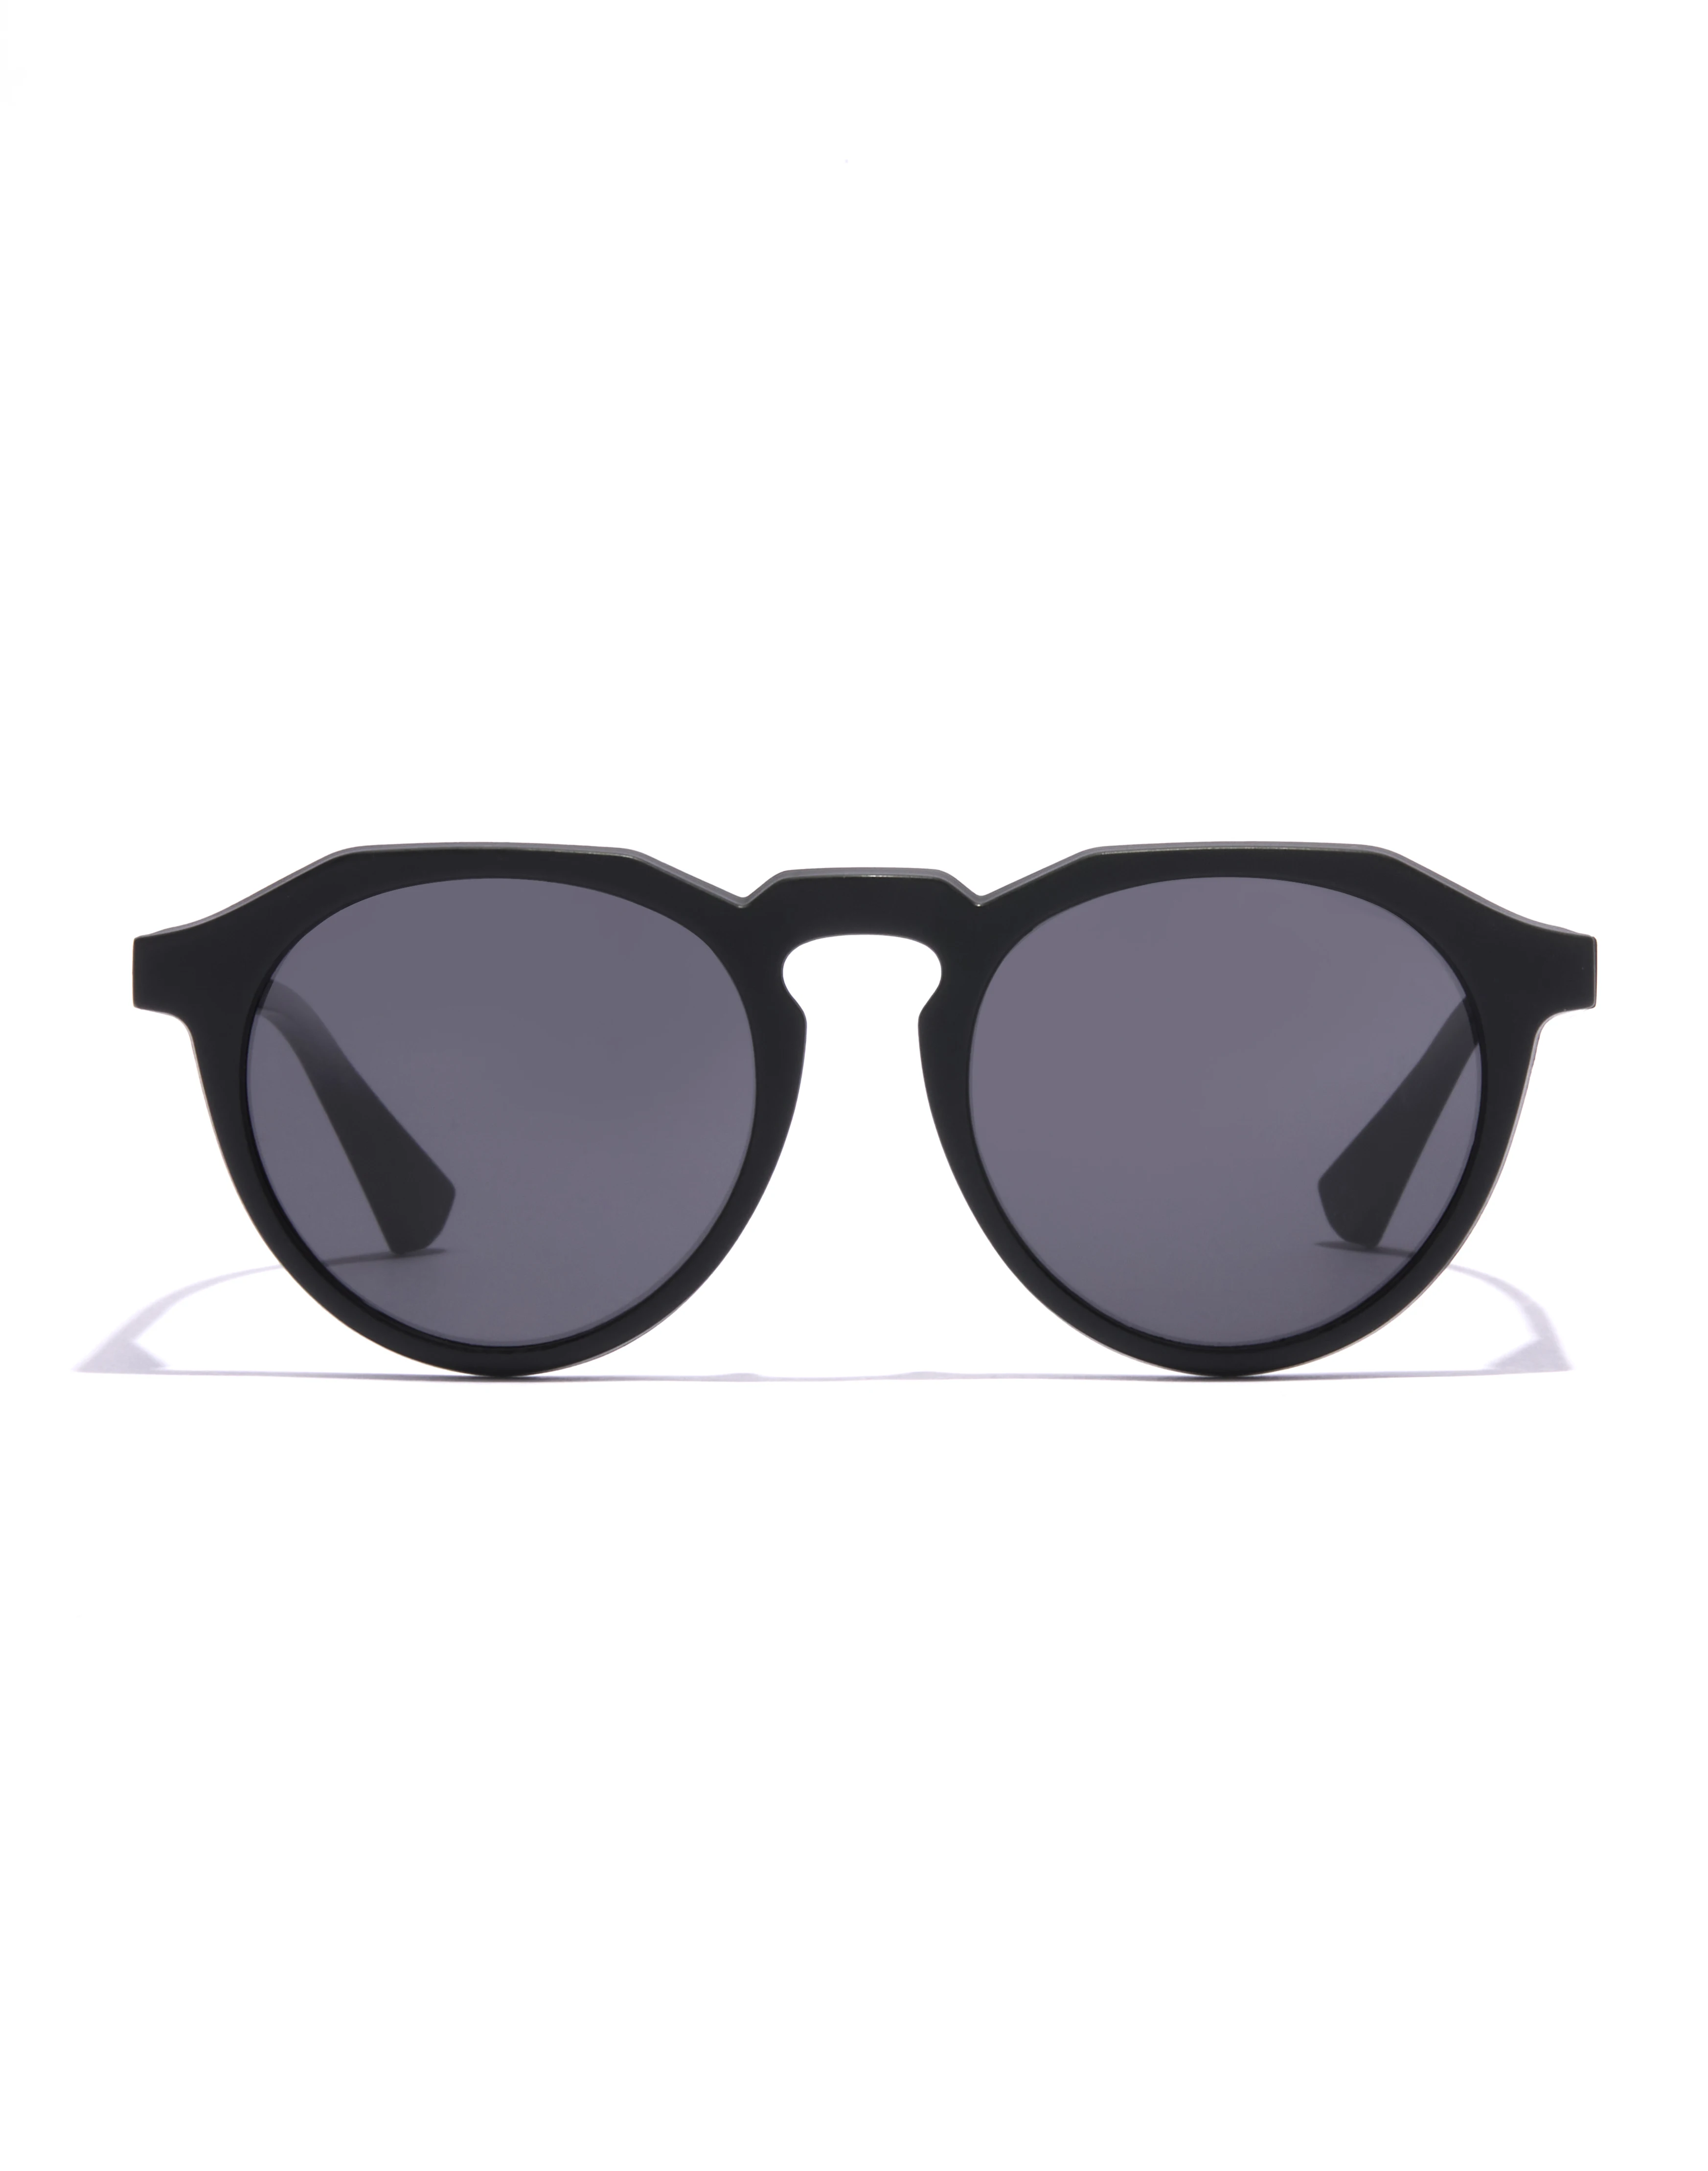 Vi ses i morgen Tyr ægteskab Hawkers Carbon Black Warwick Raw Sunglasses For Men And Women, Unisex.  Designed And Manufactured In Spain - Sunglasses - AliExpress